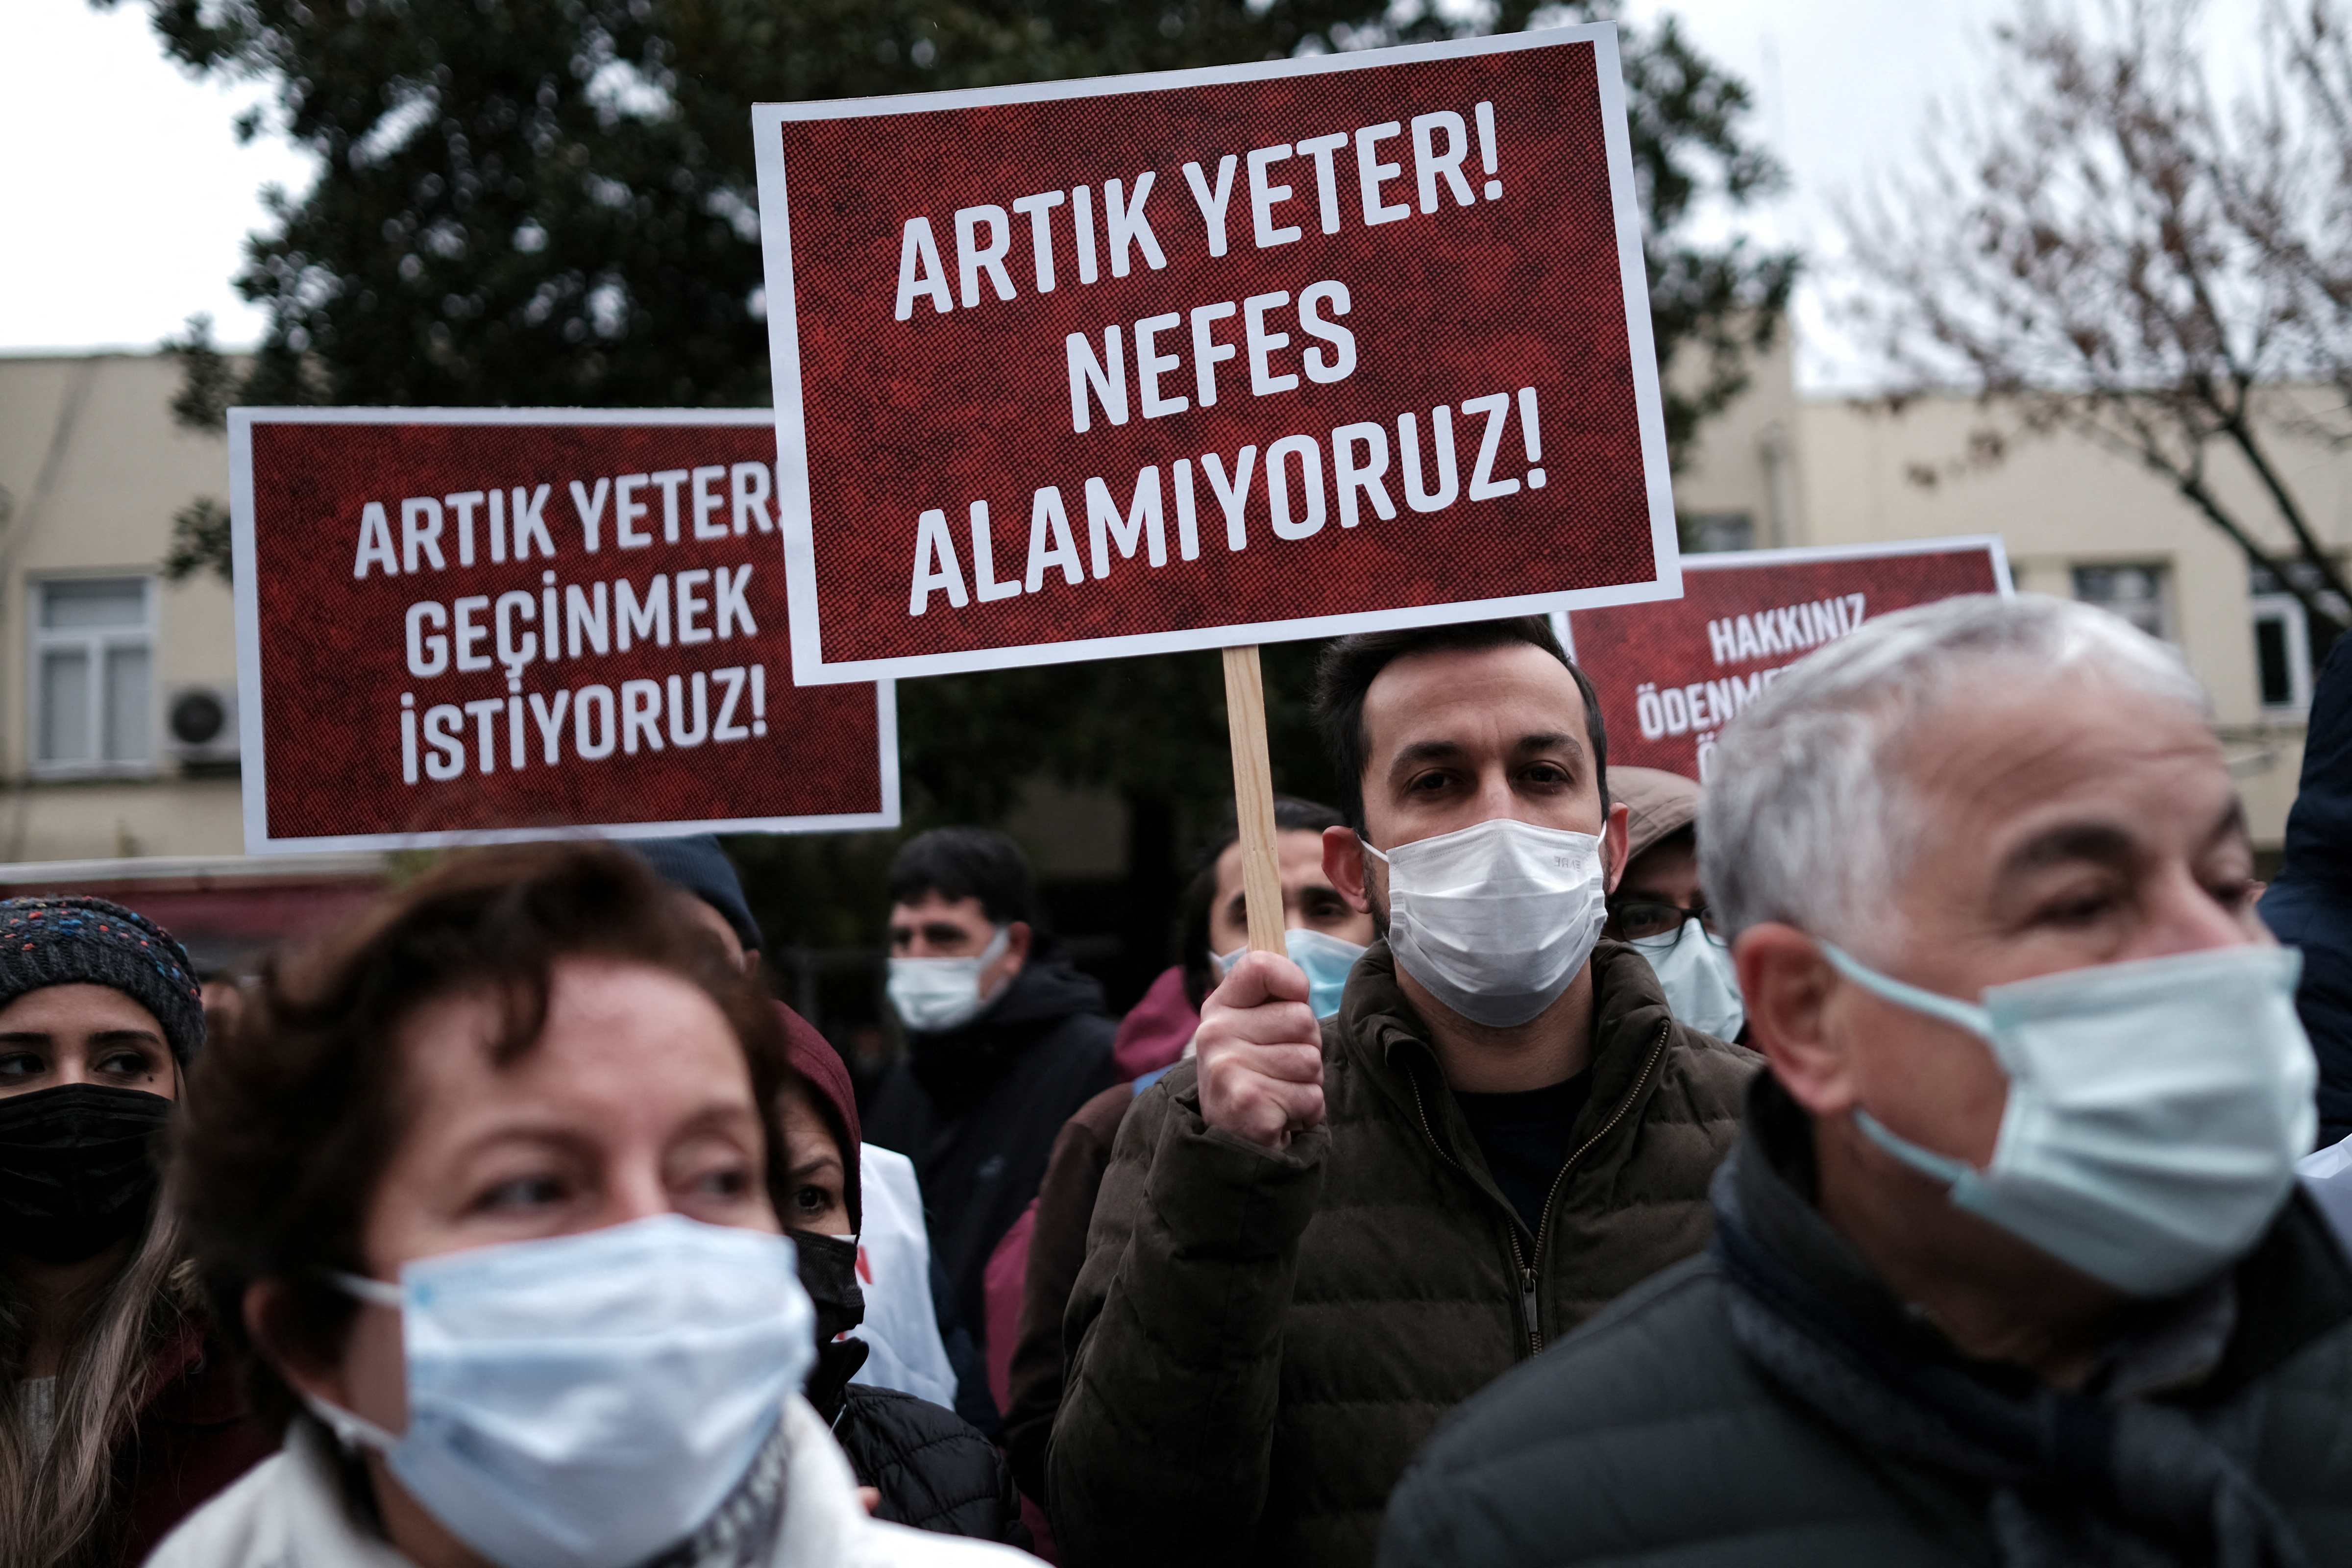 Medical workers take part in a protest against poor wages and harsh working conditions amid a currency meltdown, in Istanbul